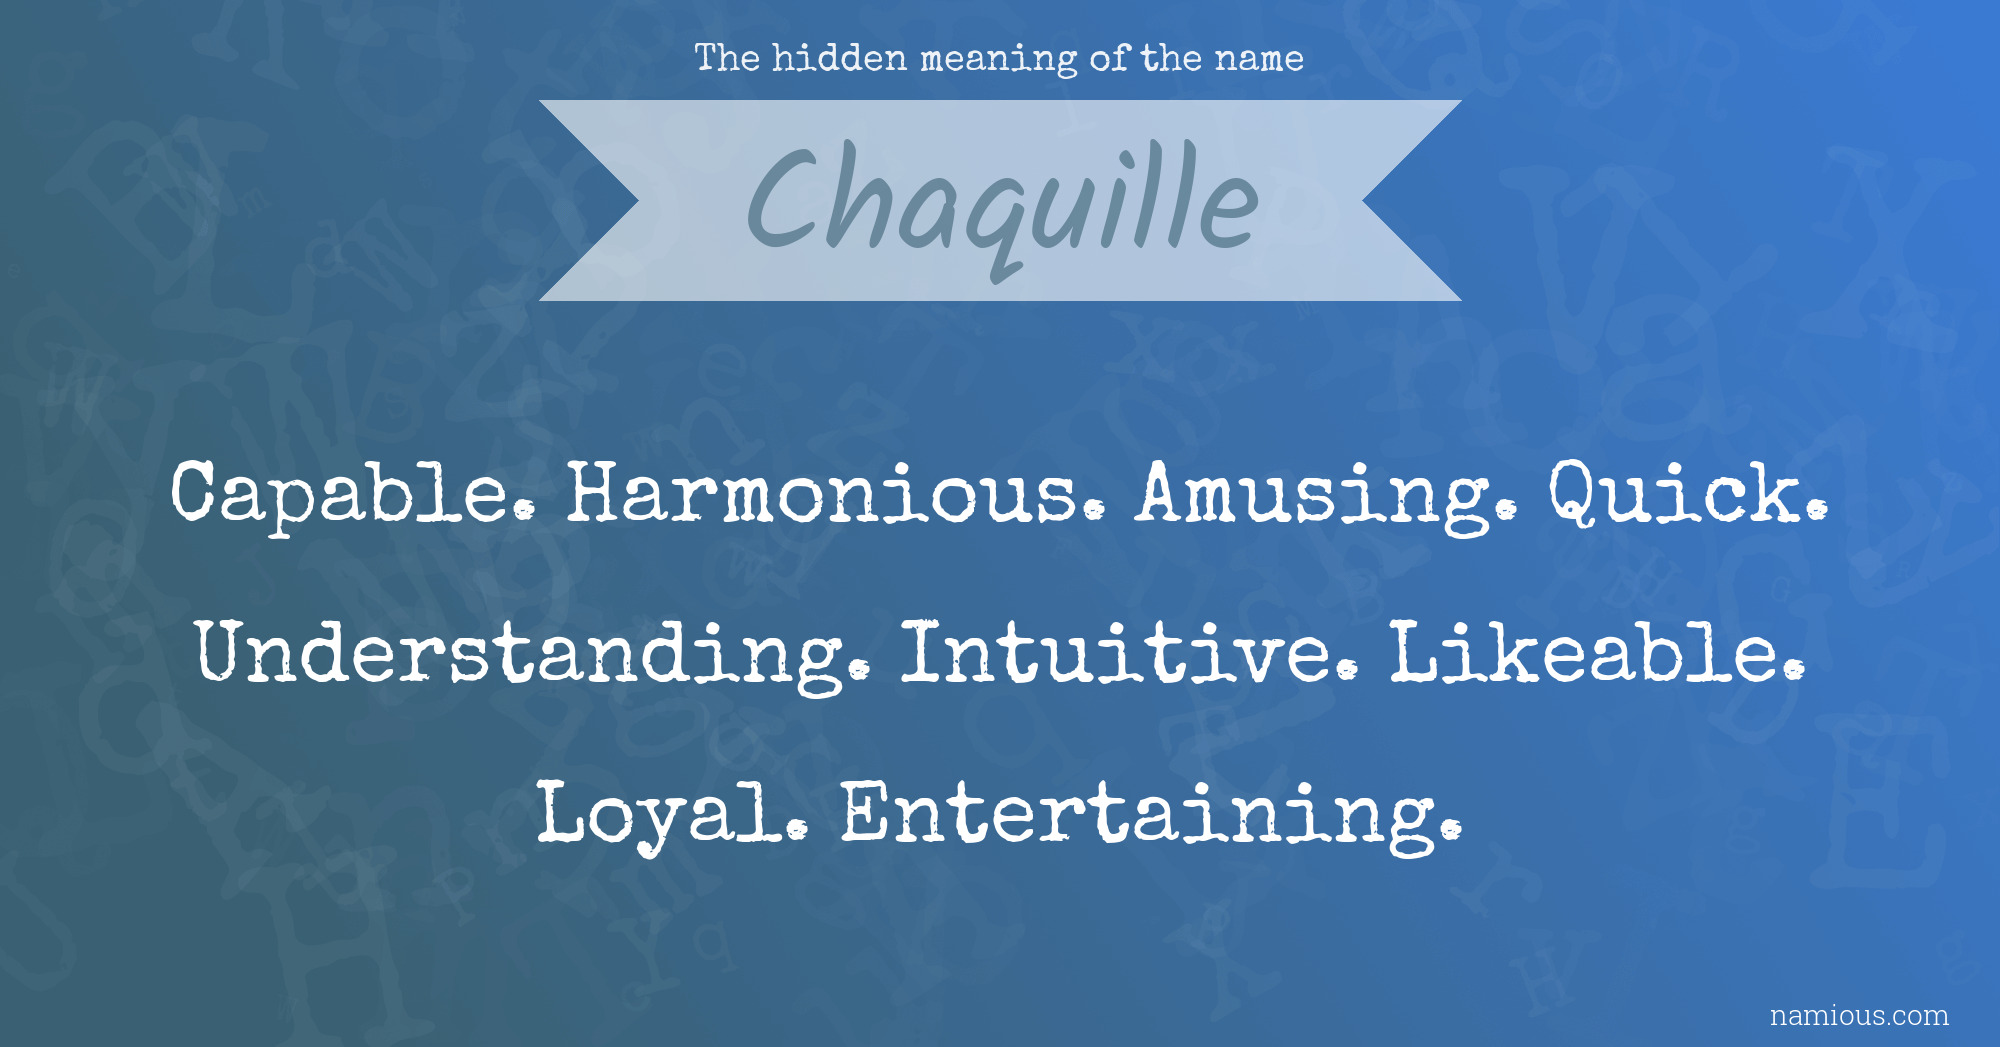 The hidden meaning of the name Chaquille